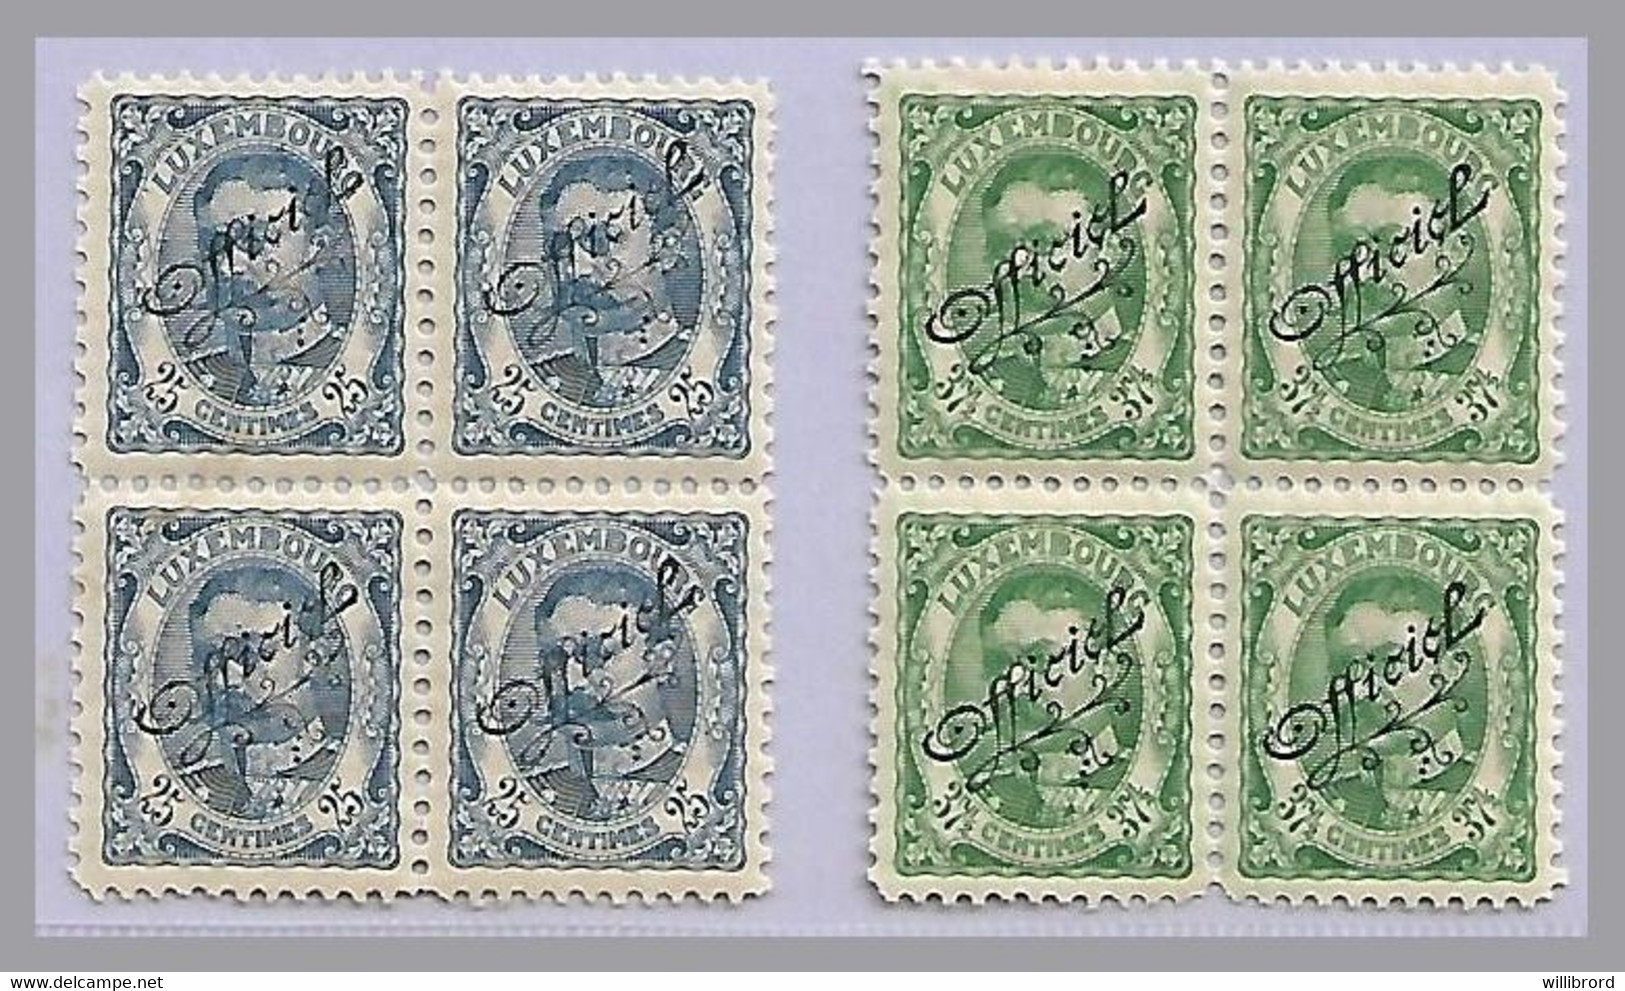 LUXEMBOURG - G.D. William IV OFFICIALS  - 25c & 37½c Blocks Of 4 - Mint Never Hinged - 1906 Guillaume IV